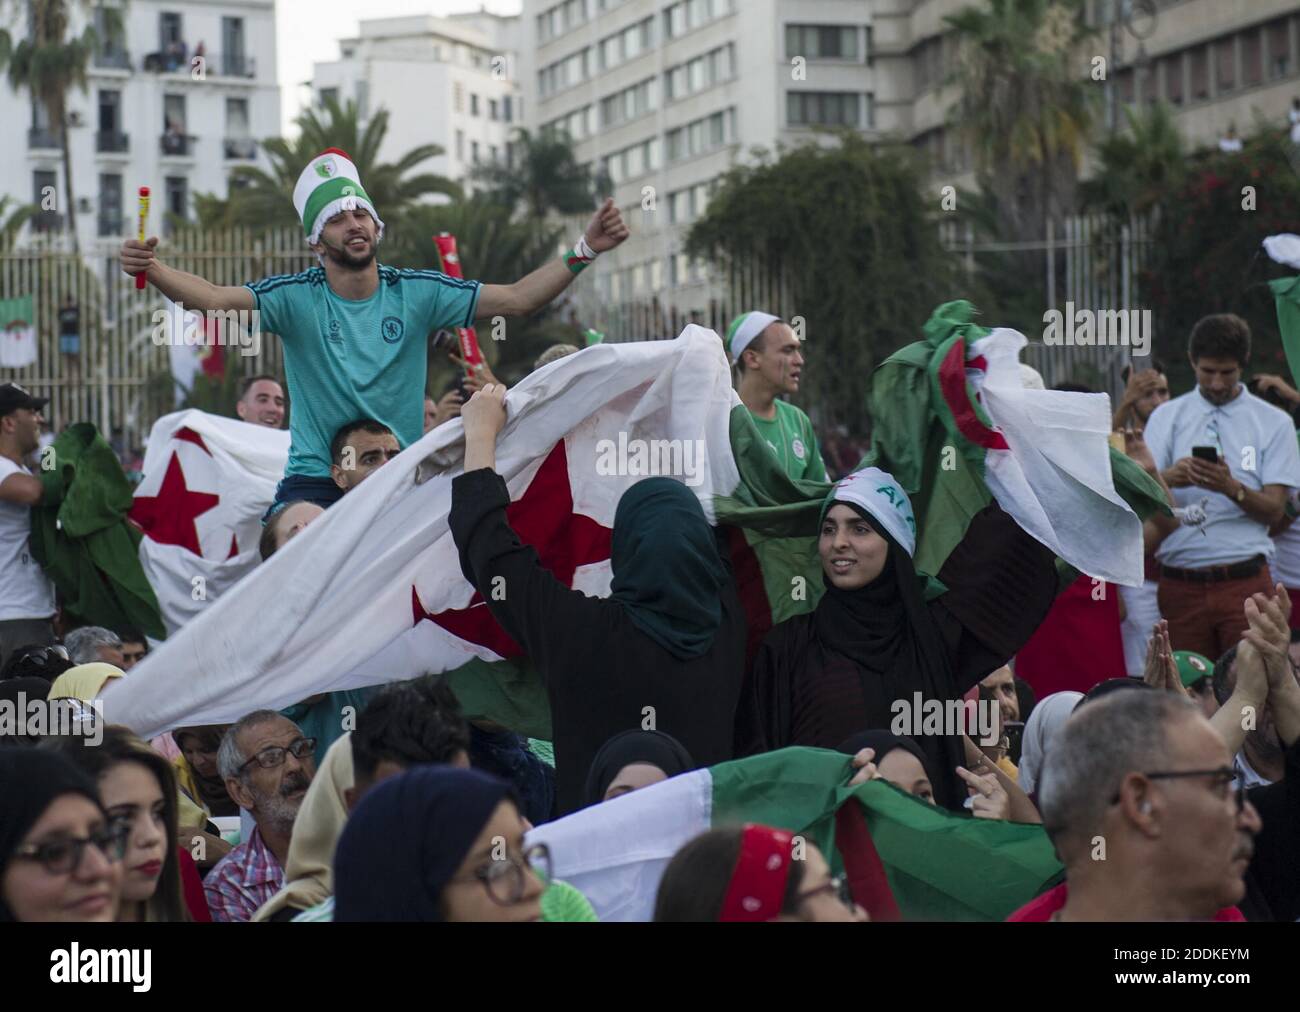 Algeria supporters celebrate after Algeria won the 2019 Africa Cup of Nations (CAN) semi-final football match against Nigeria, on the Grande Poste place in Algiers on July 14, 2019. Riyad Mahrez rifled in a stoppage-time free-kick to earn Algeria a dramatic 2-1 victory over three-time champions Nigeria on July 14 and set up a rematch with Senegal in the Africa Cup of Nations final. Photo by Louiza AmmI/ABACAPRESS.COM Stock Photo